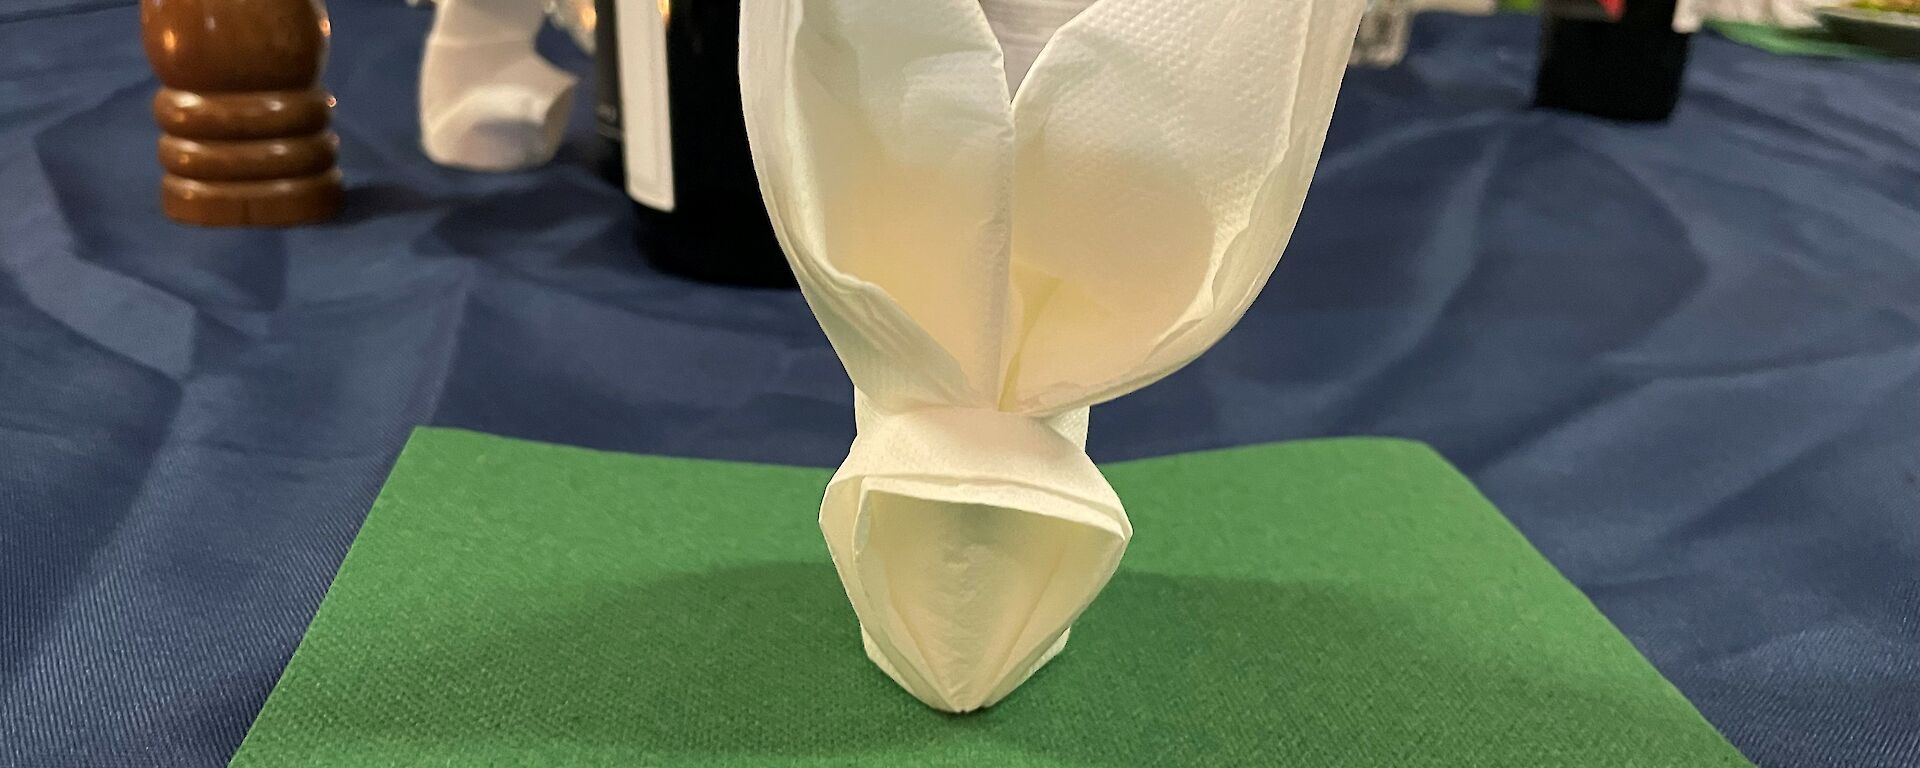 A white paper napkin folded into the shape of a rabbit's head, placed on a dining table in front of some wine bottles